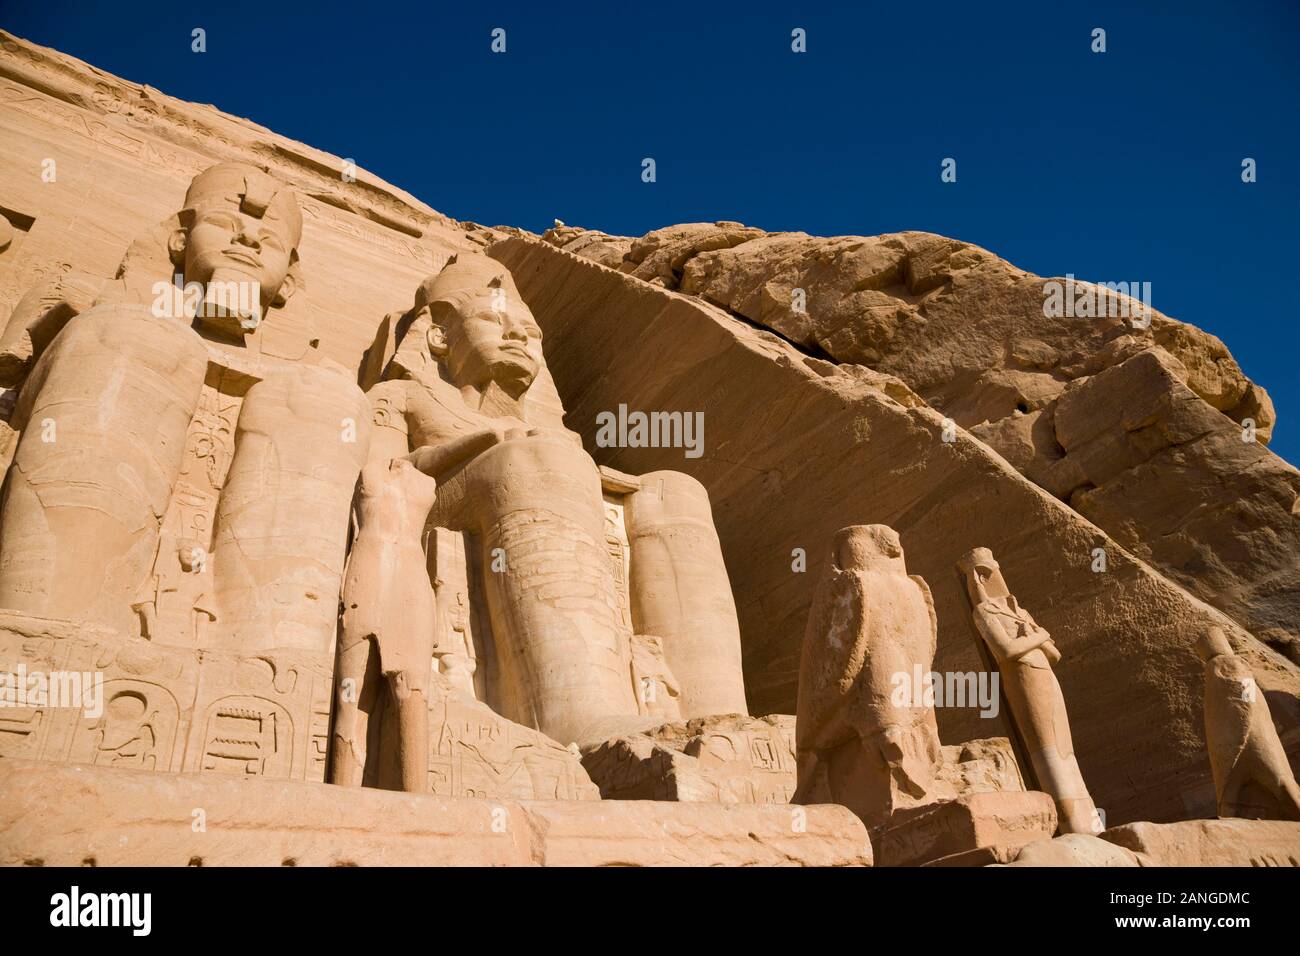 Statue of Ramesses II, at the Great Temple, Abu Simbel temples, Nubian Monuments, Aswan Governorate, Egypt, North Africa, Africa Stock Photo